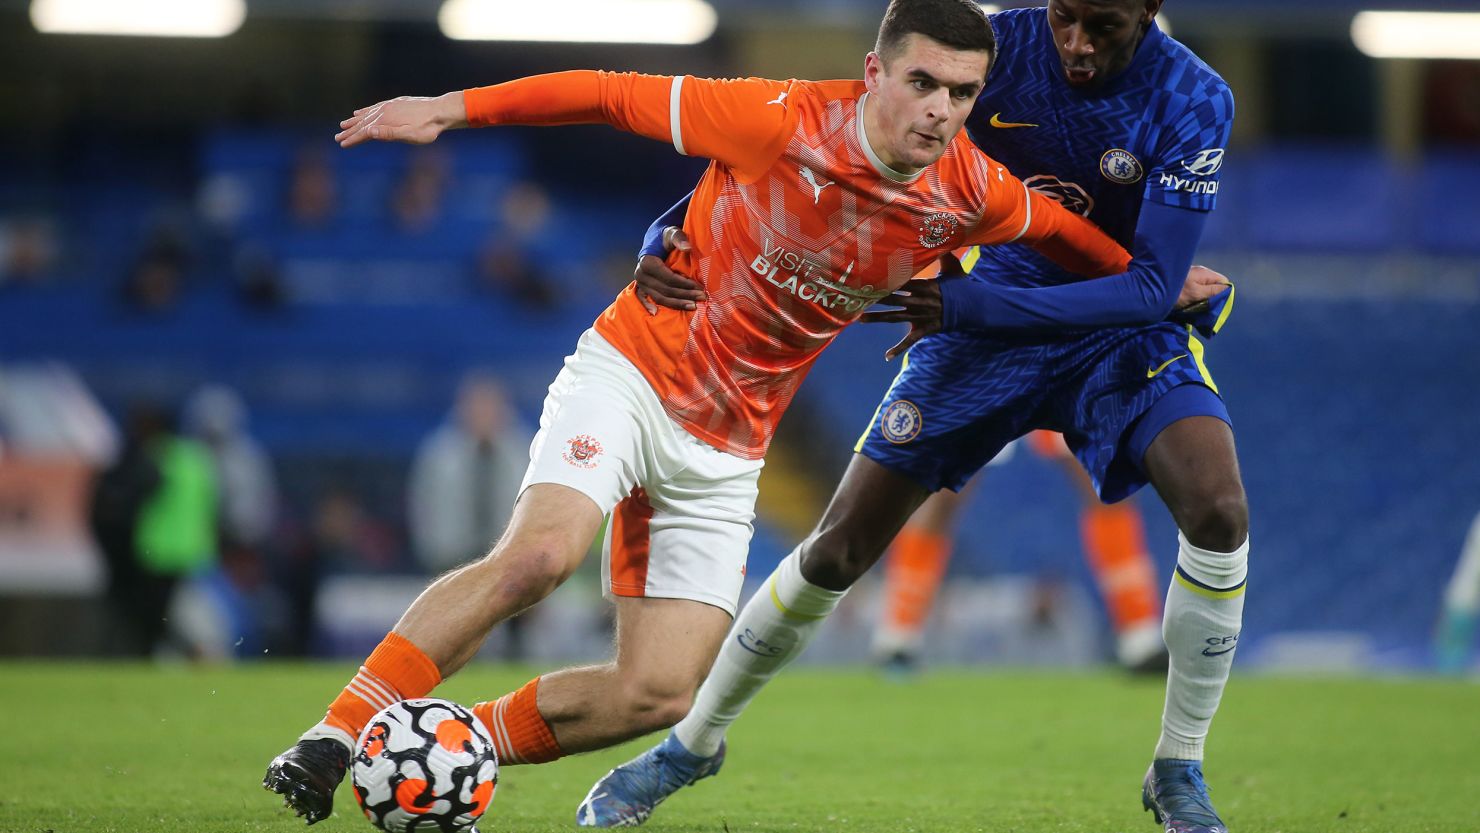 Jake Daniels shields the ball from Chelsea' s Luke Badley Morgan during Chelsea Under-18 vs. Blackpool Under-18 in the FA Youth Cup.